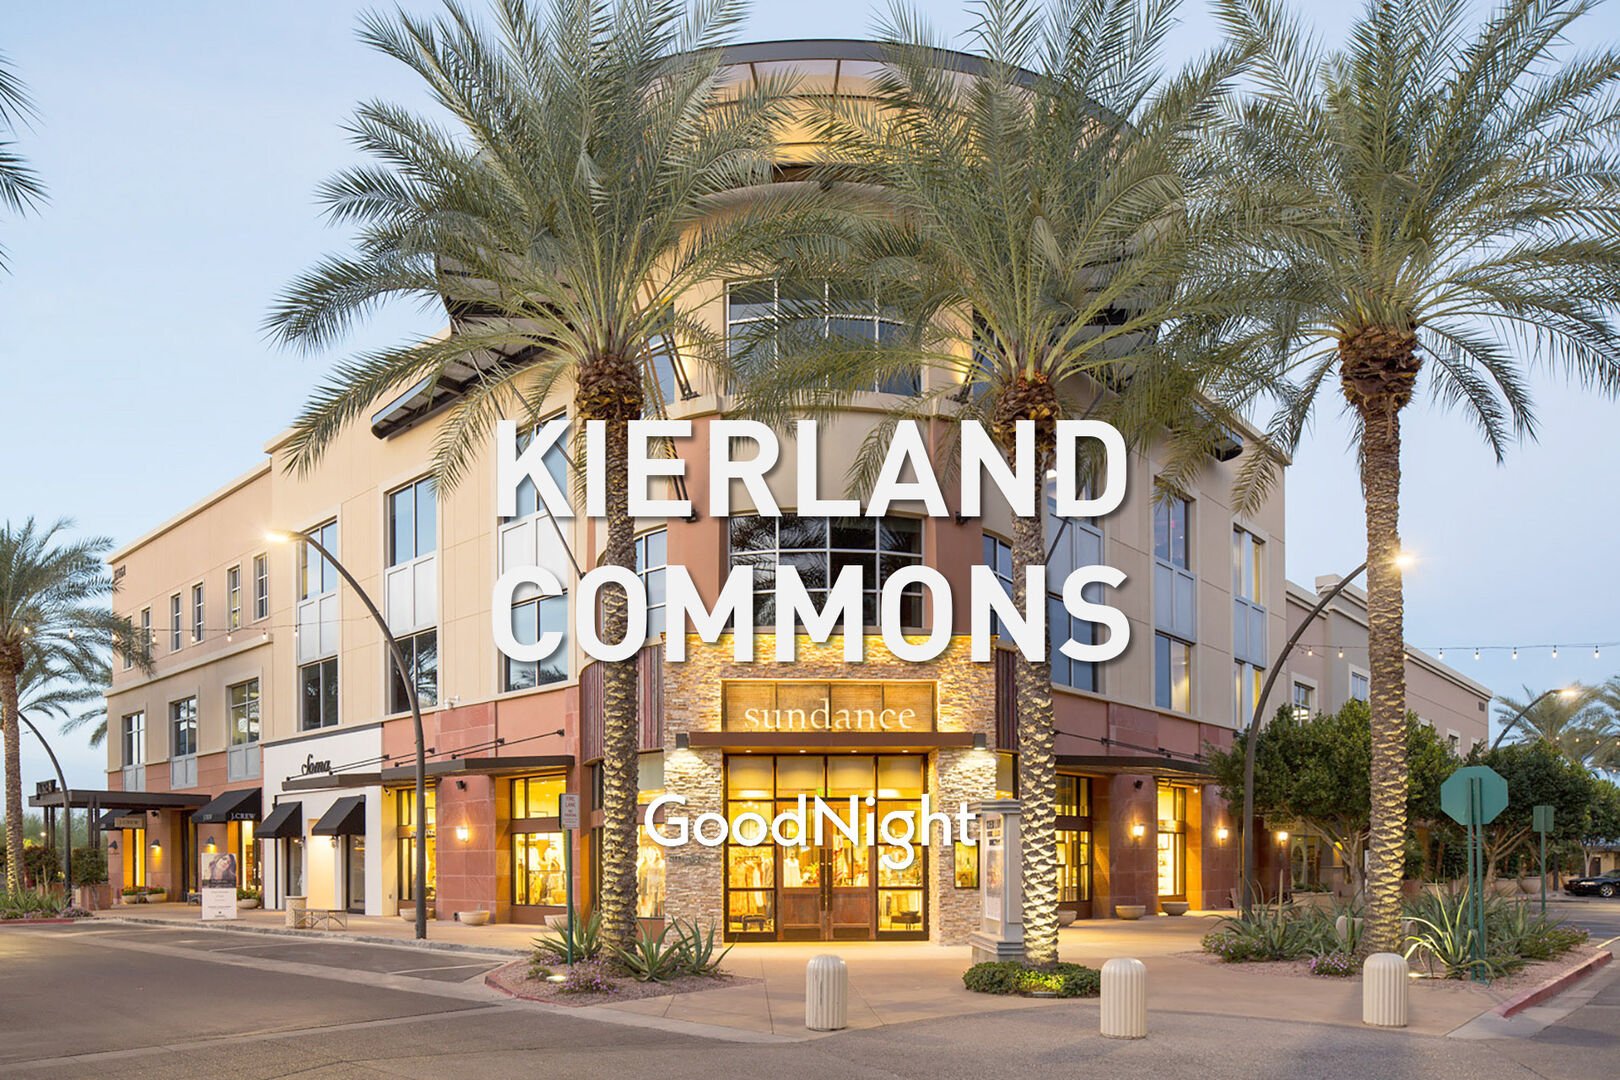 18 minutes to Kierland Commons